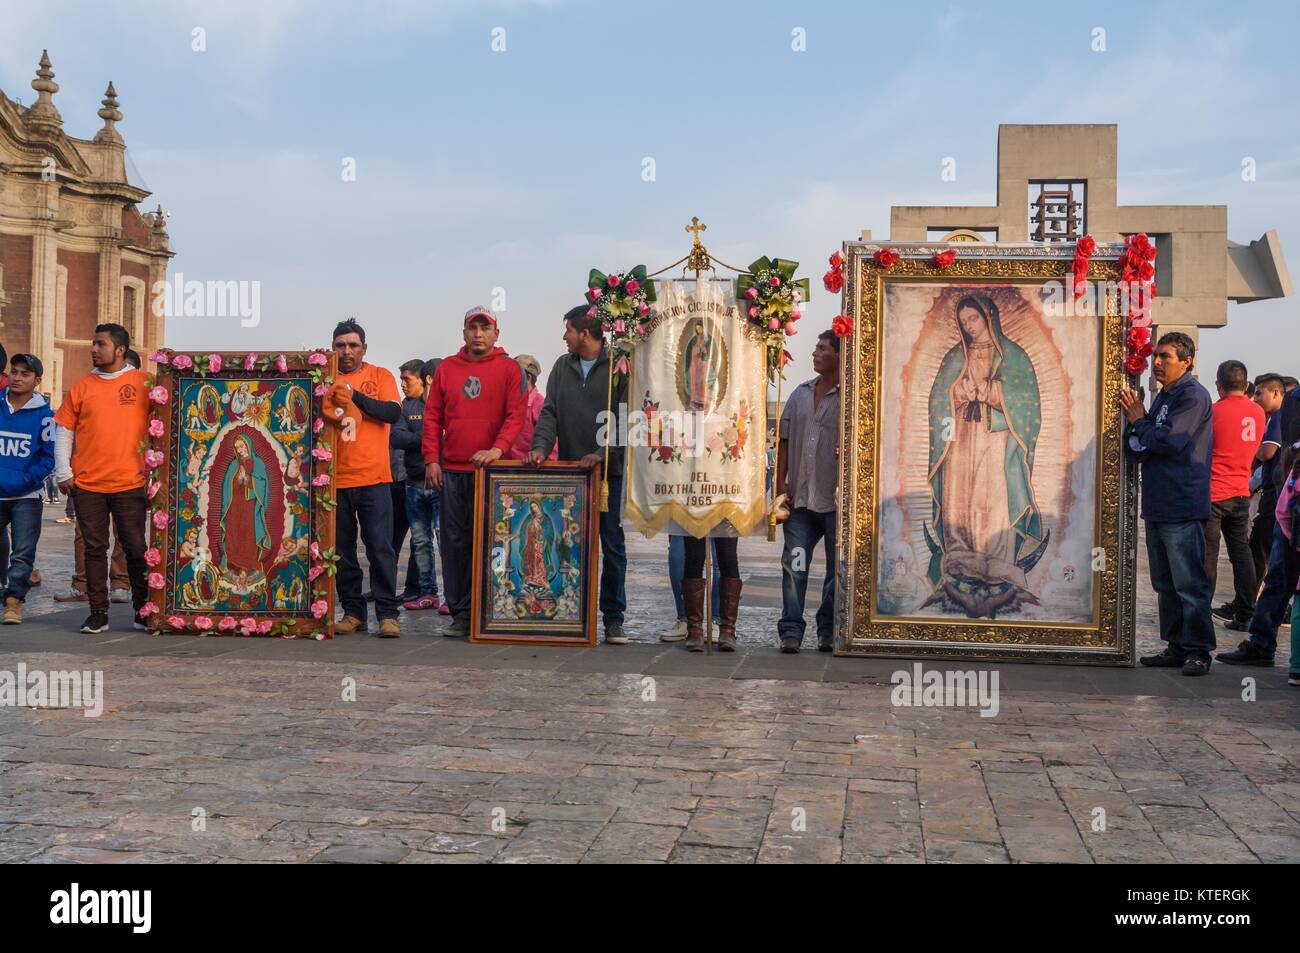 VILLA OF GUADALUPE, MEXICO CITY, DECEMBER 02, 2017 - Each year millions of pilgrims arrive to La Villa, even on days before December 12. Stock Photo